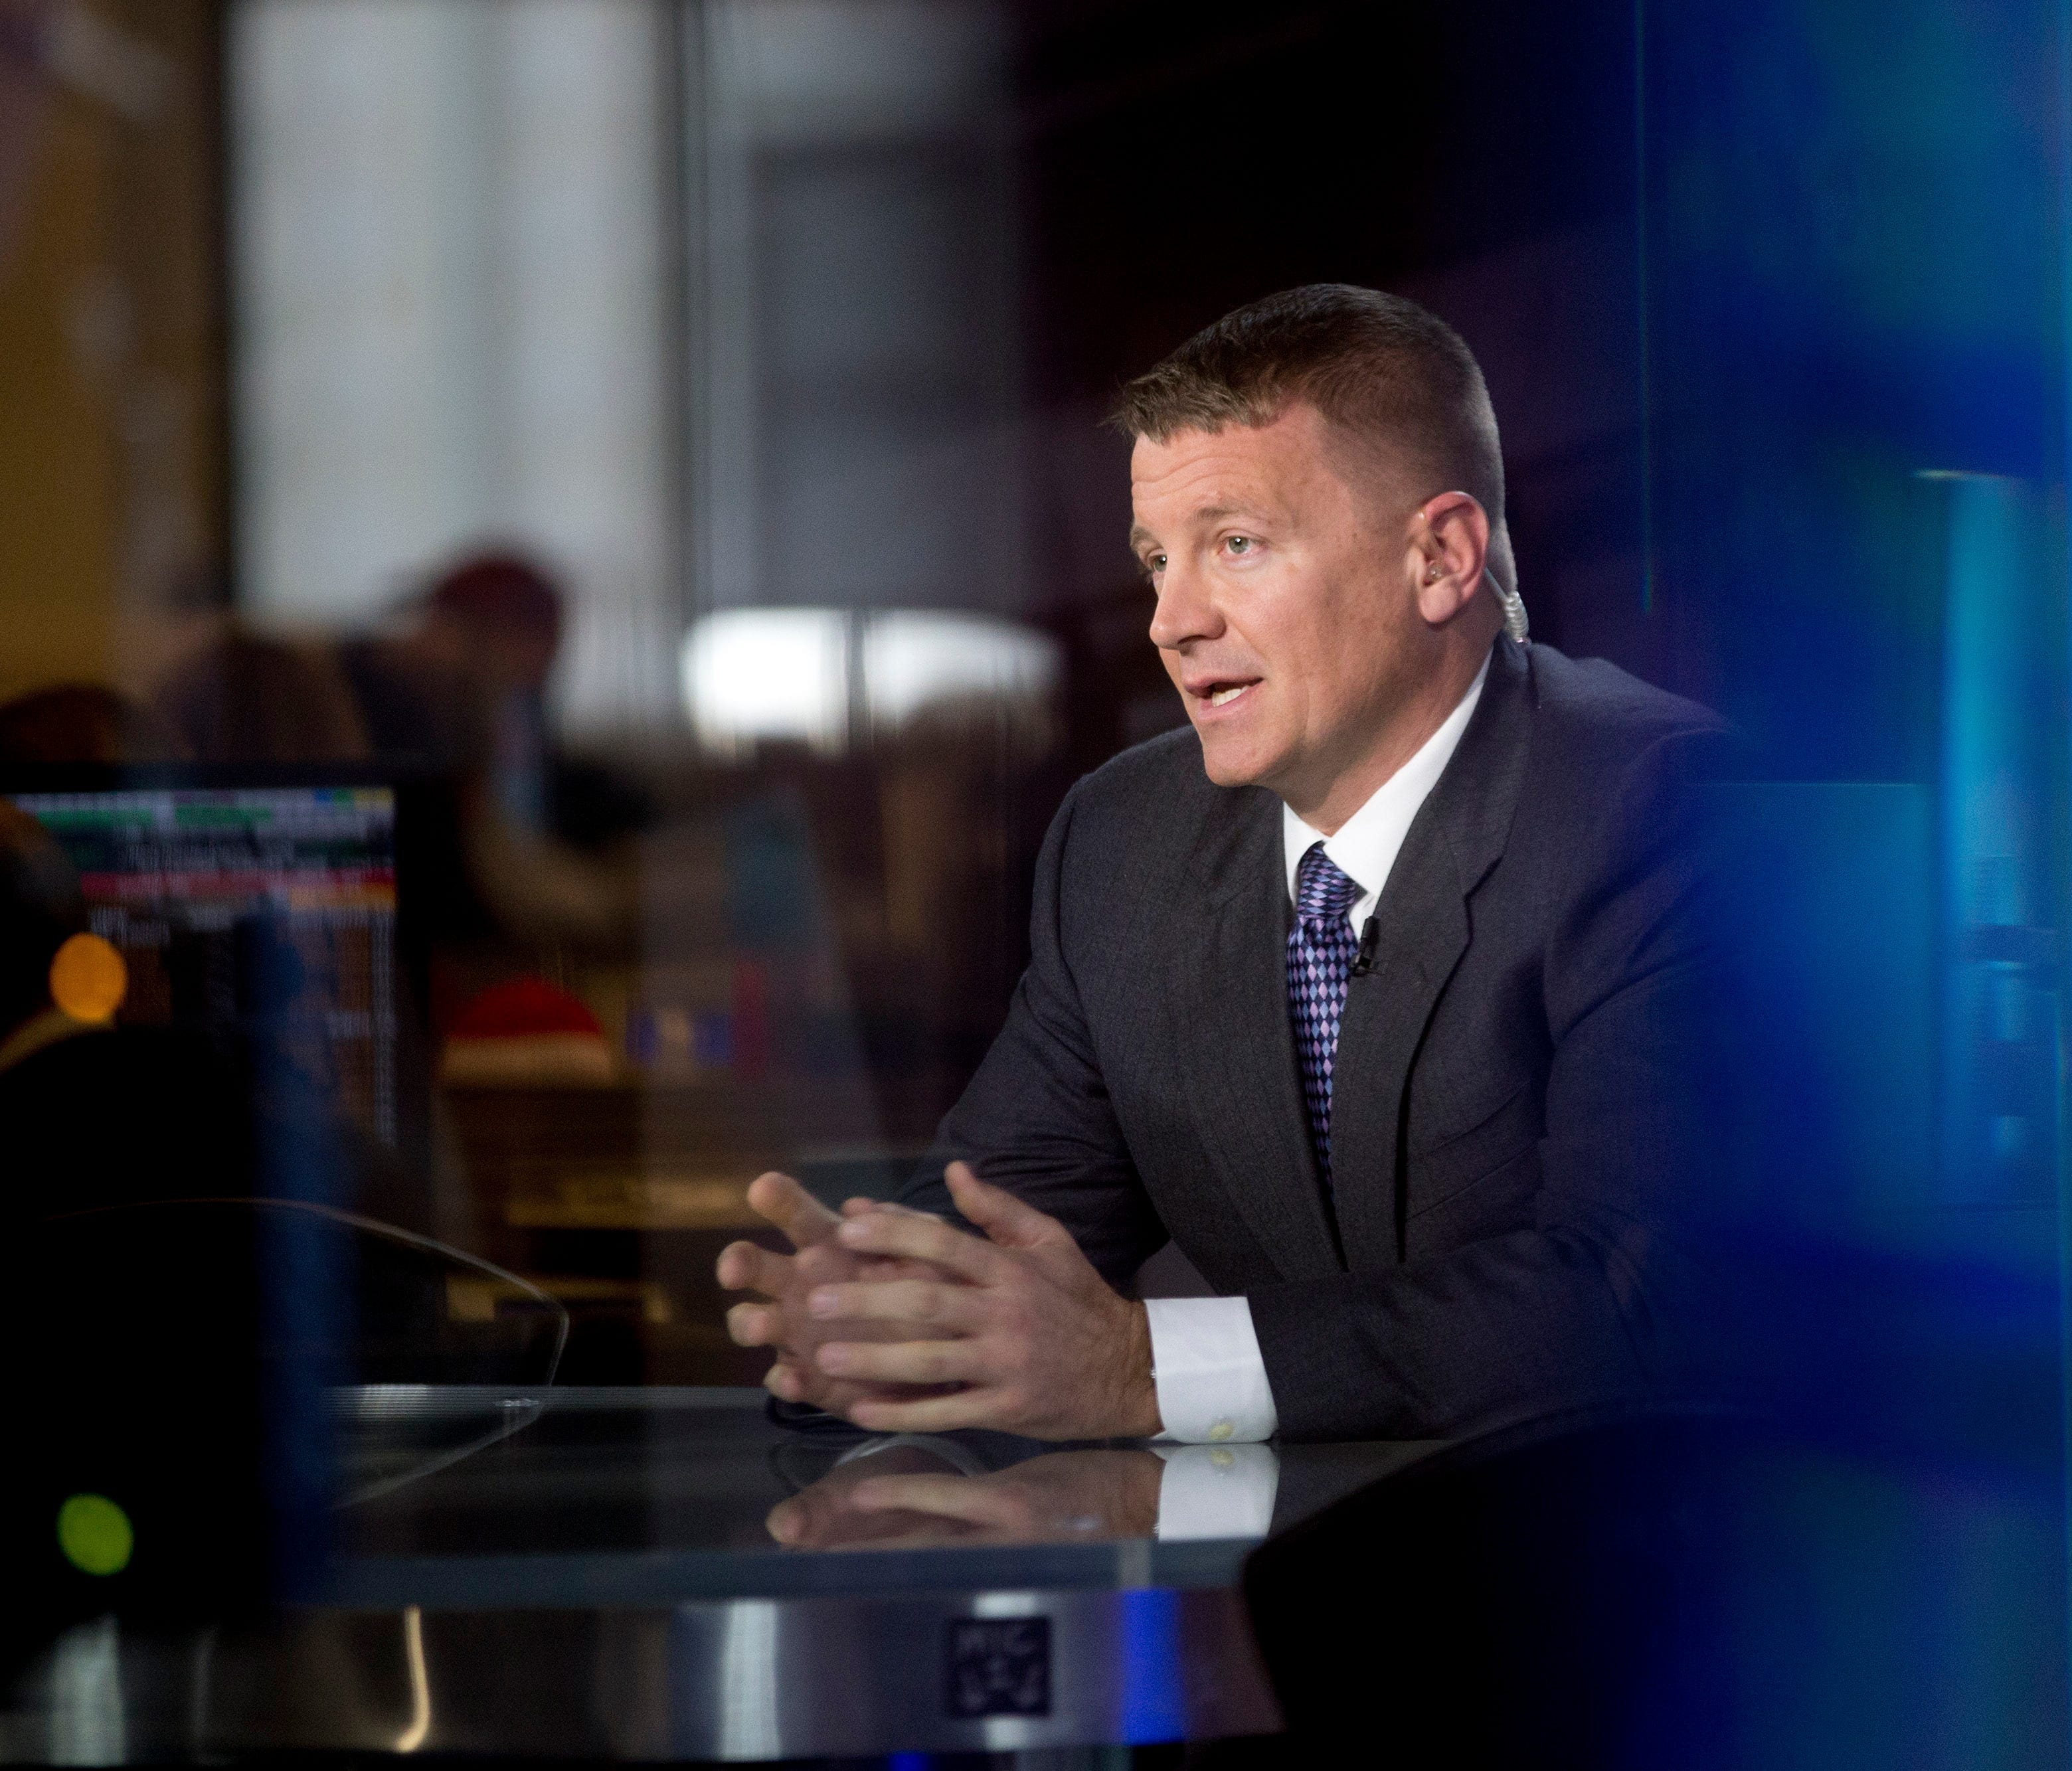 Erik Prince, chairman and executive director of DVN Holdings Ltd. and founder of Xe Services LLC, the U.S. security company once known as Blackwater Worldwide, speaks during a Bloomberg Television interview in Washington, D.C., Jan. 31, 2014.